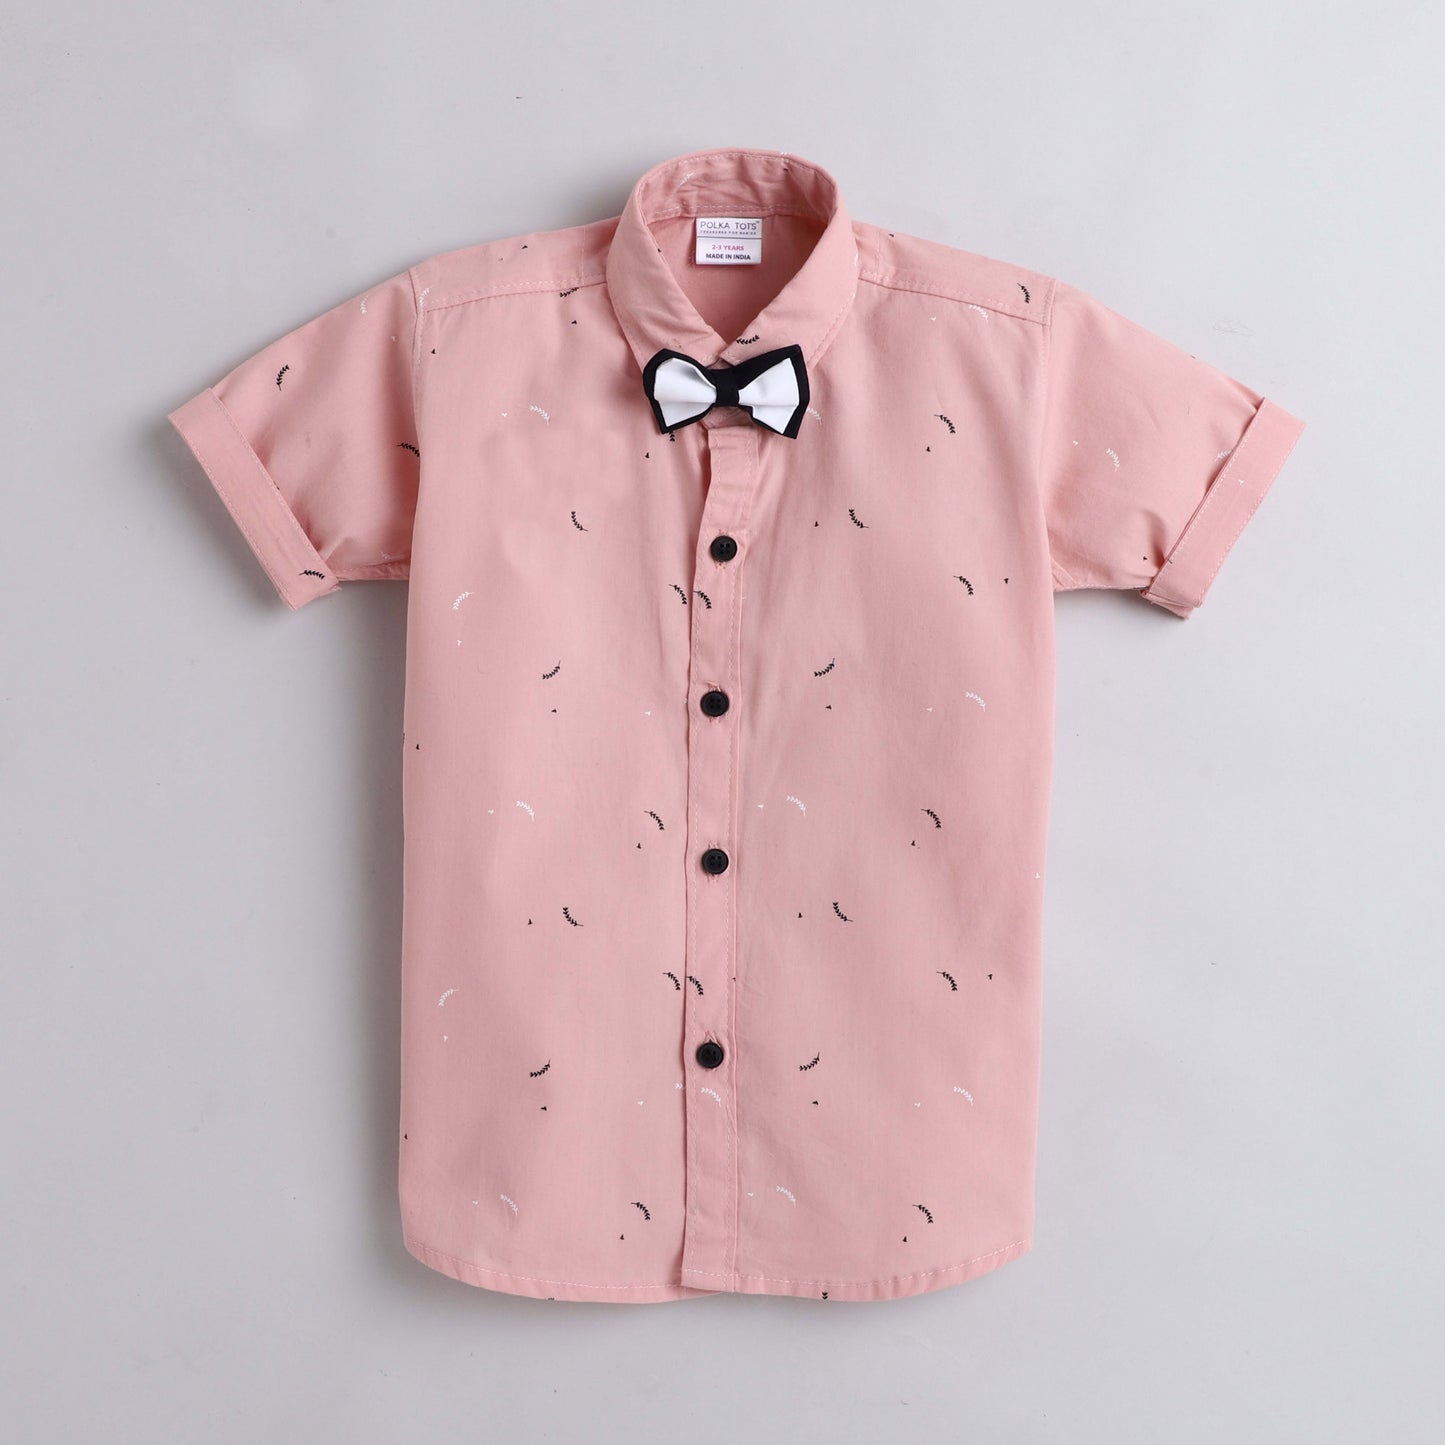 Polka Tots Half Sleeves All Over Leaves Printed Shirt With Bow Tie - Pink